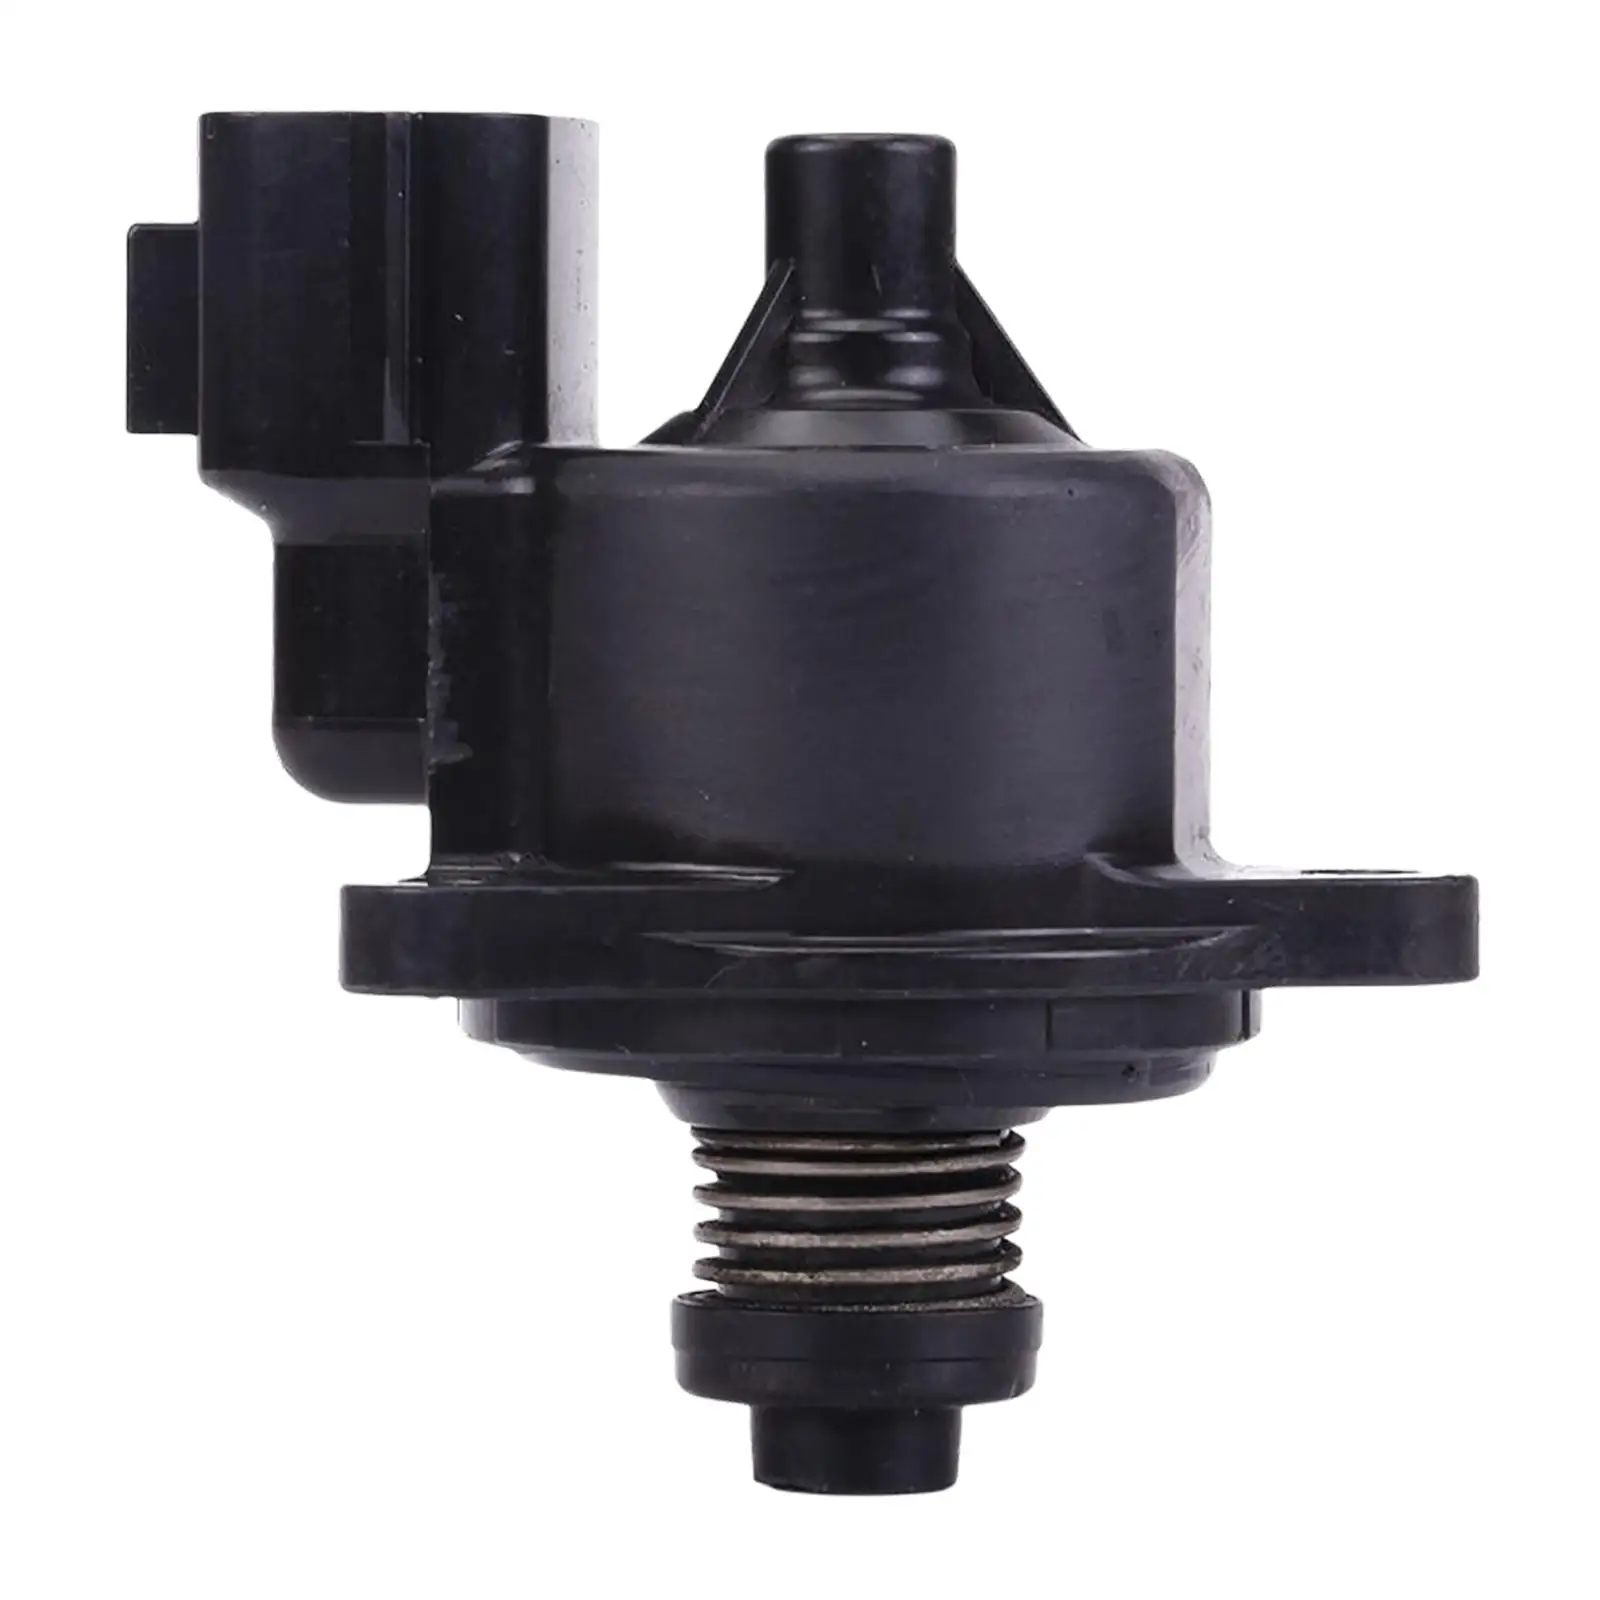 Idle  Valve, 6812A-00-00,  ,6812A00, 6812A-00, Car Accessories Stepper Motor for  Outboard